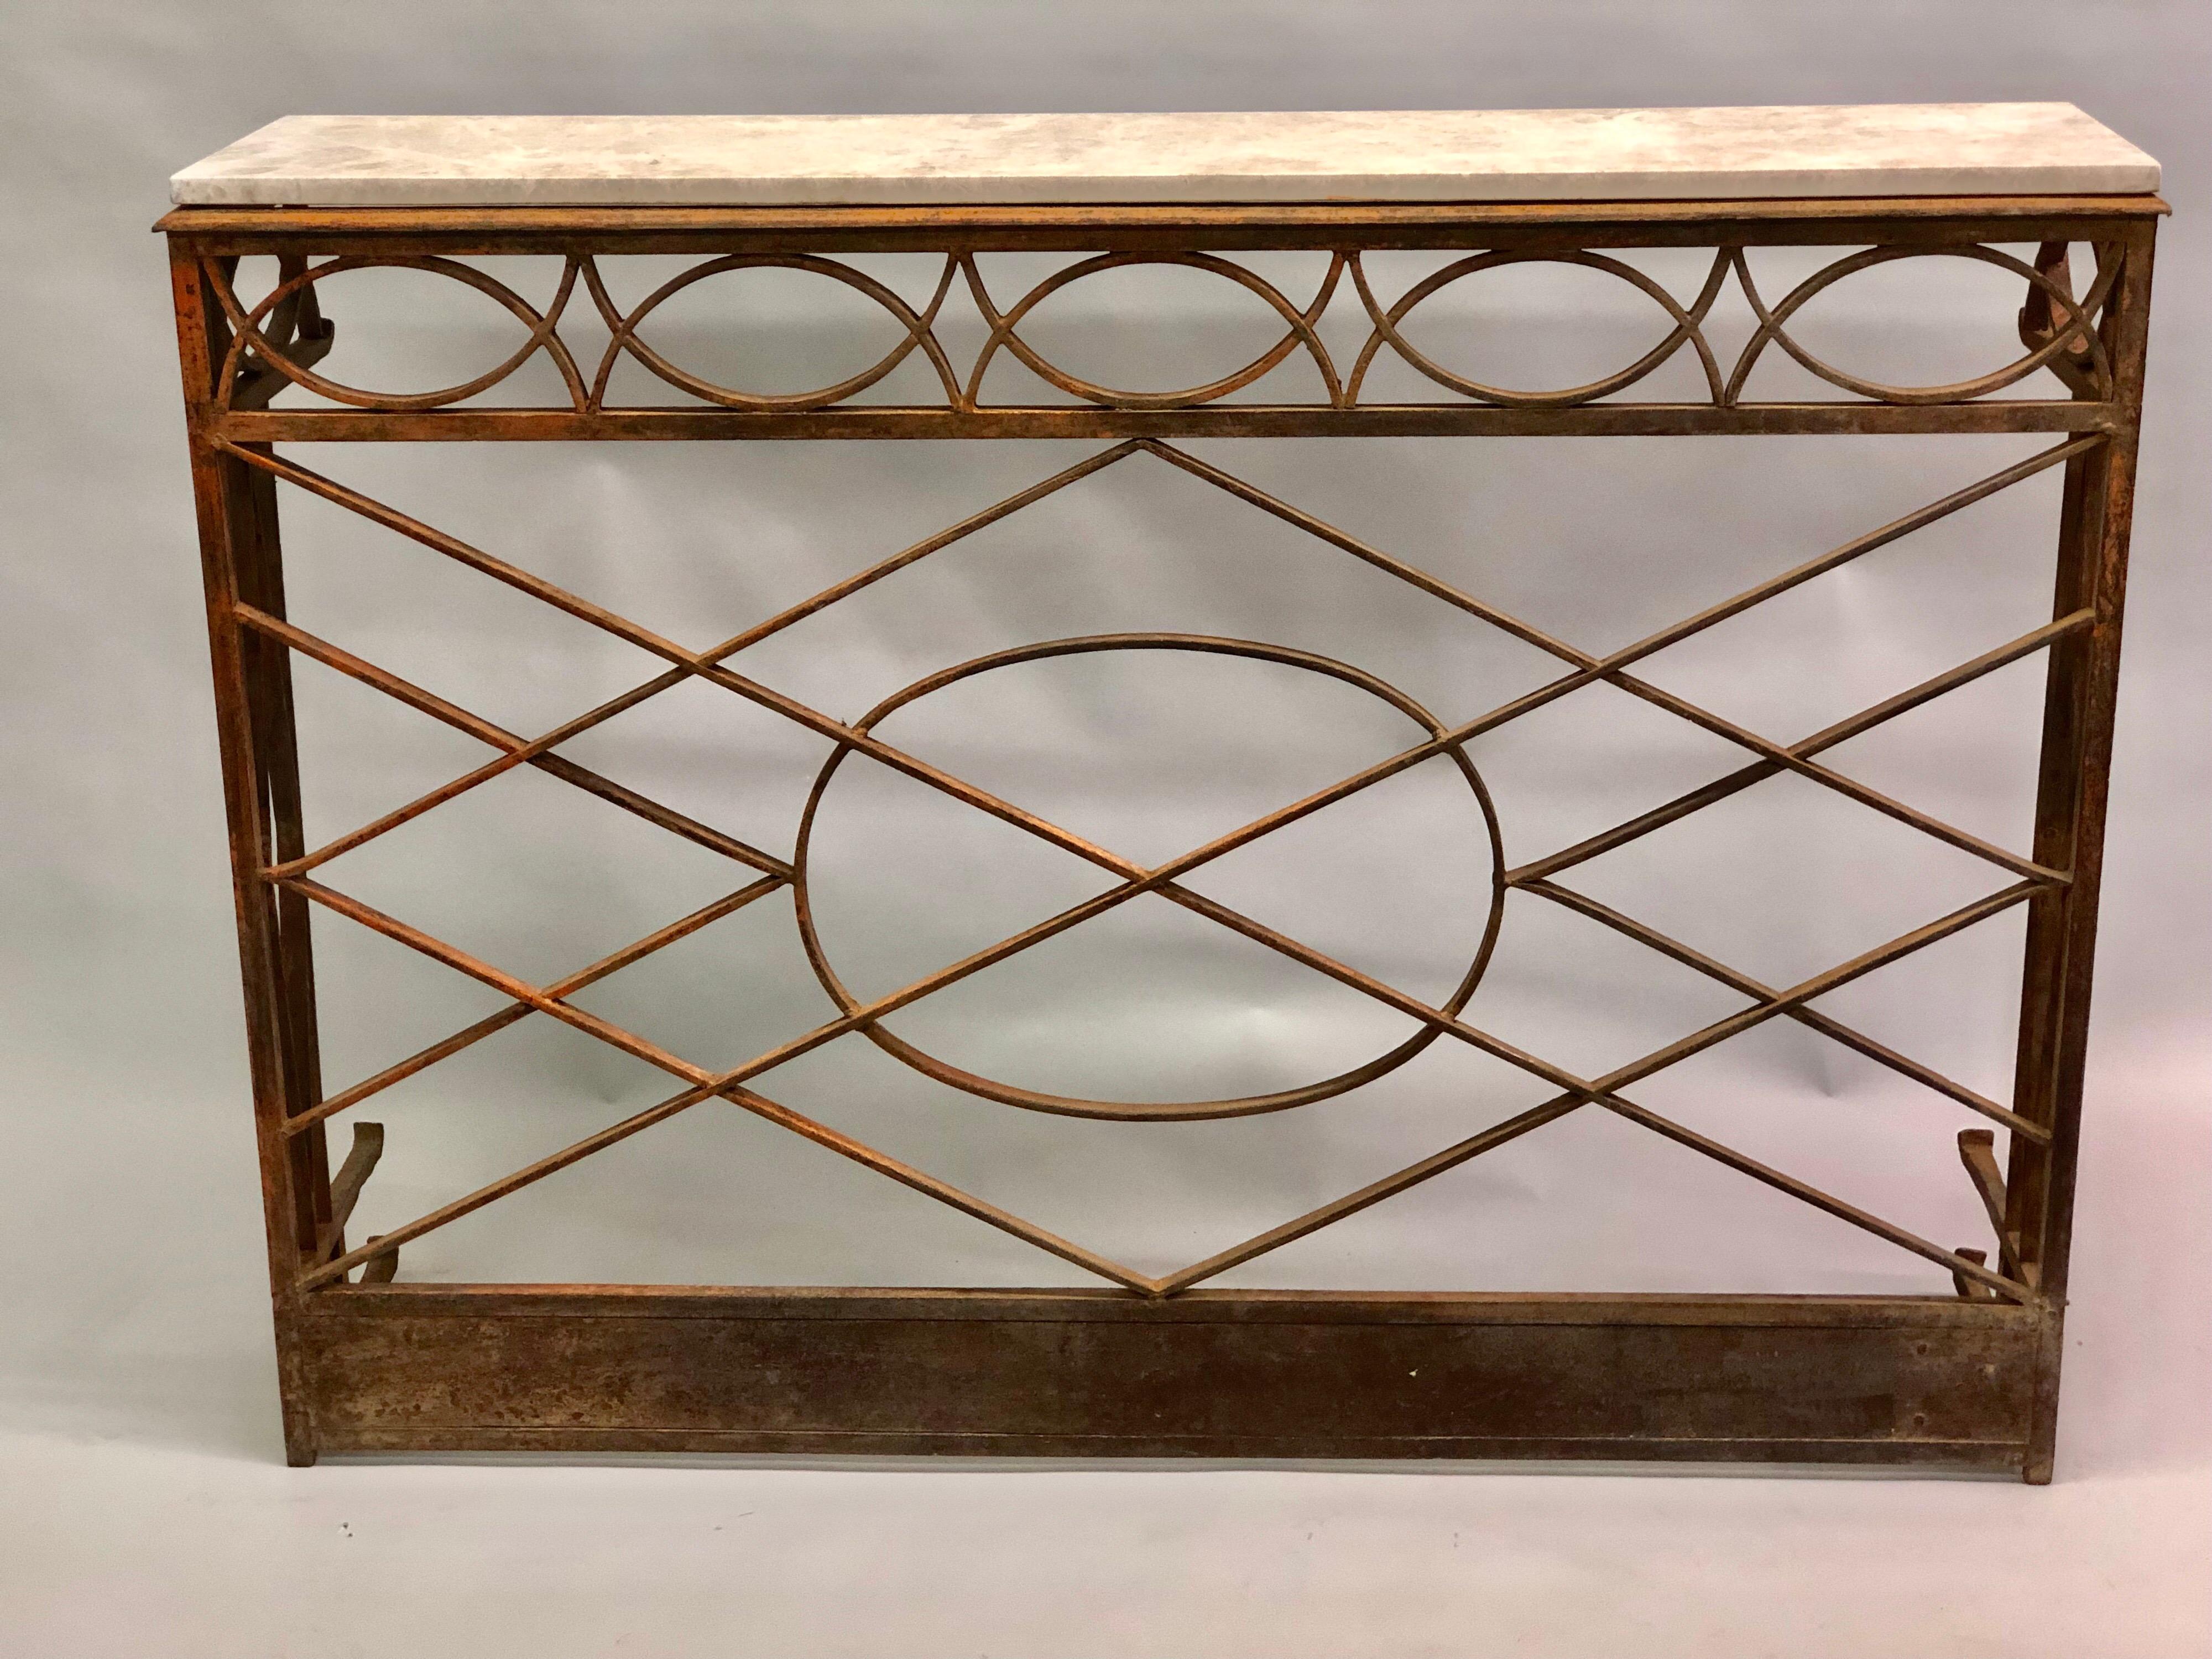 Elegant, Timeless French Modern neoclassical cast and wrought iron console with limestone top, circa 1860-1880.

The console is designed with intersecting lozenge patterns united by central circle. Much of its original paint remain, mixed with